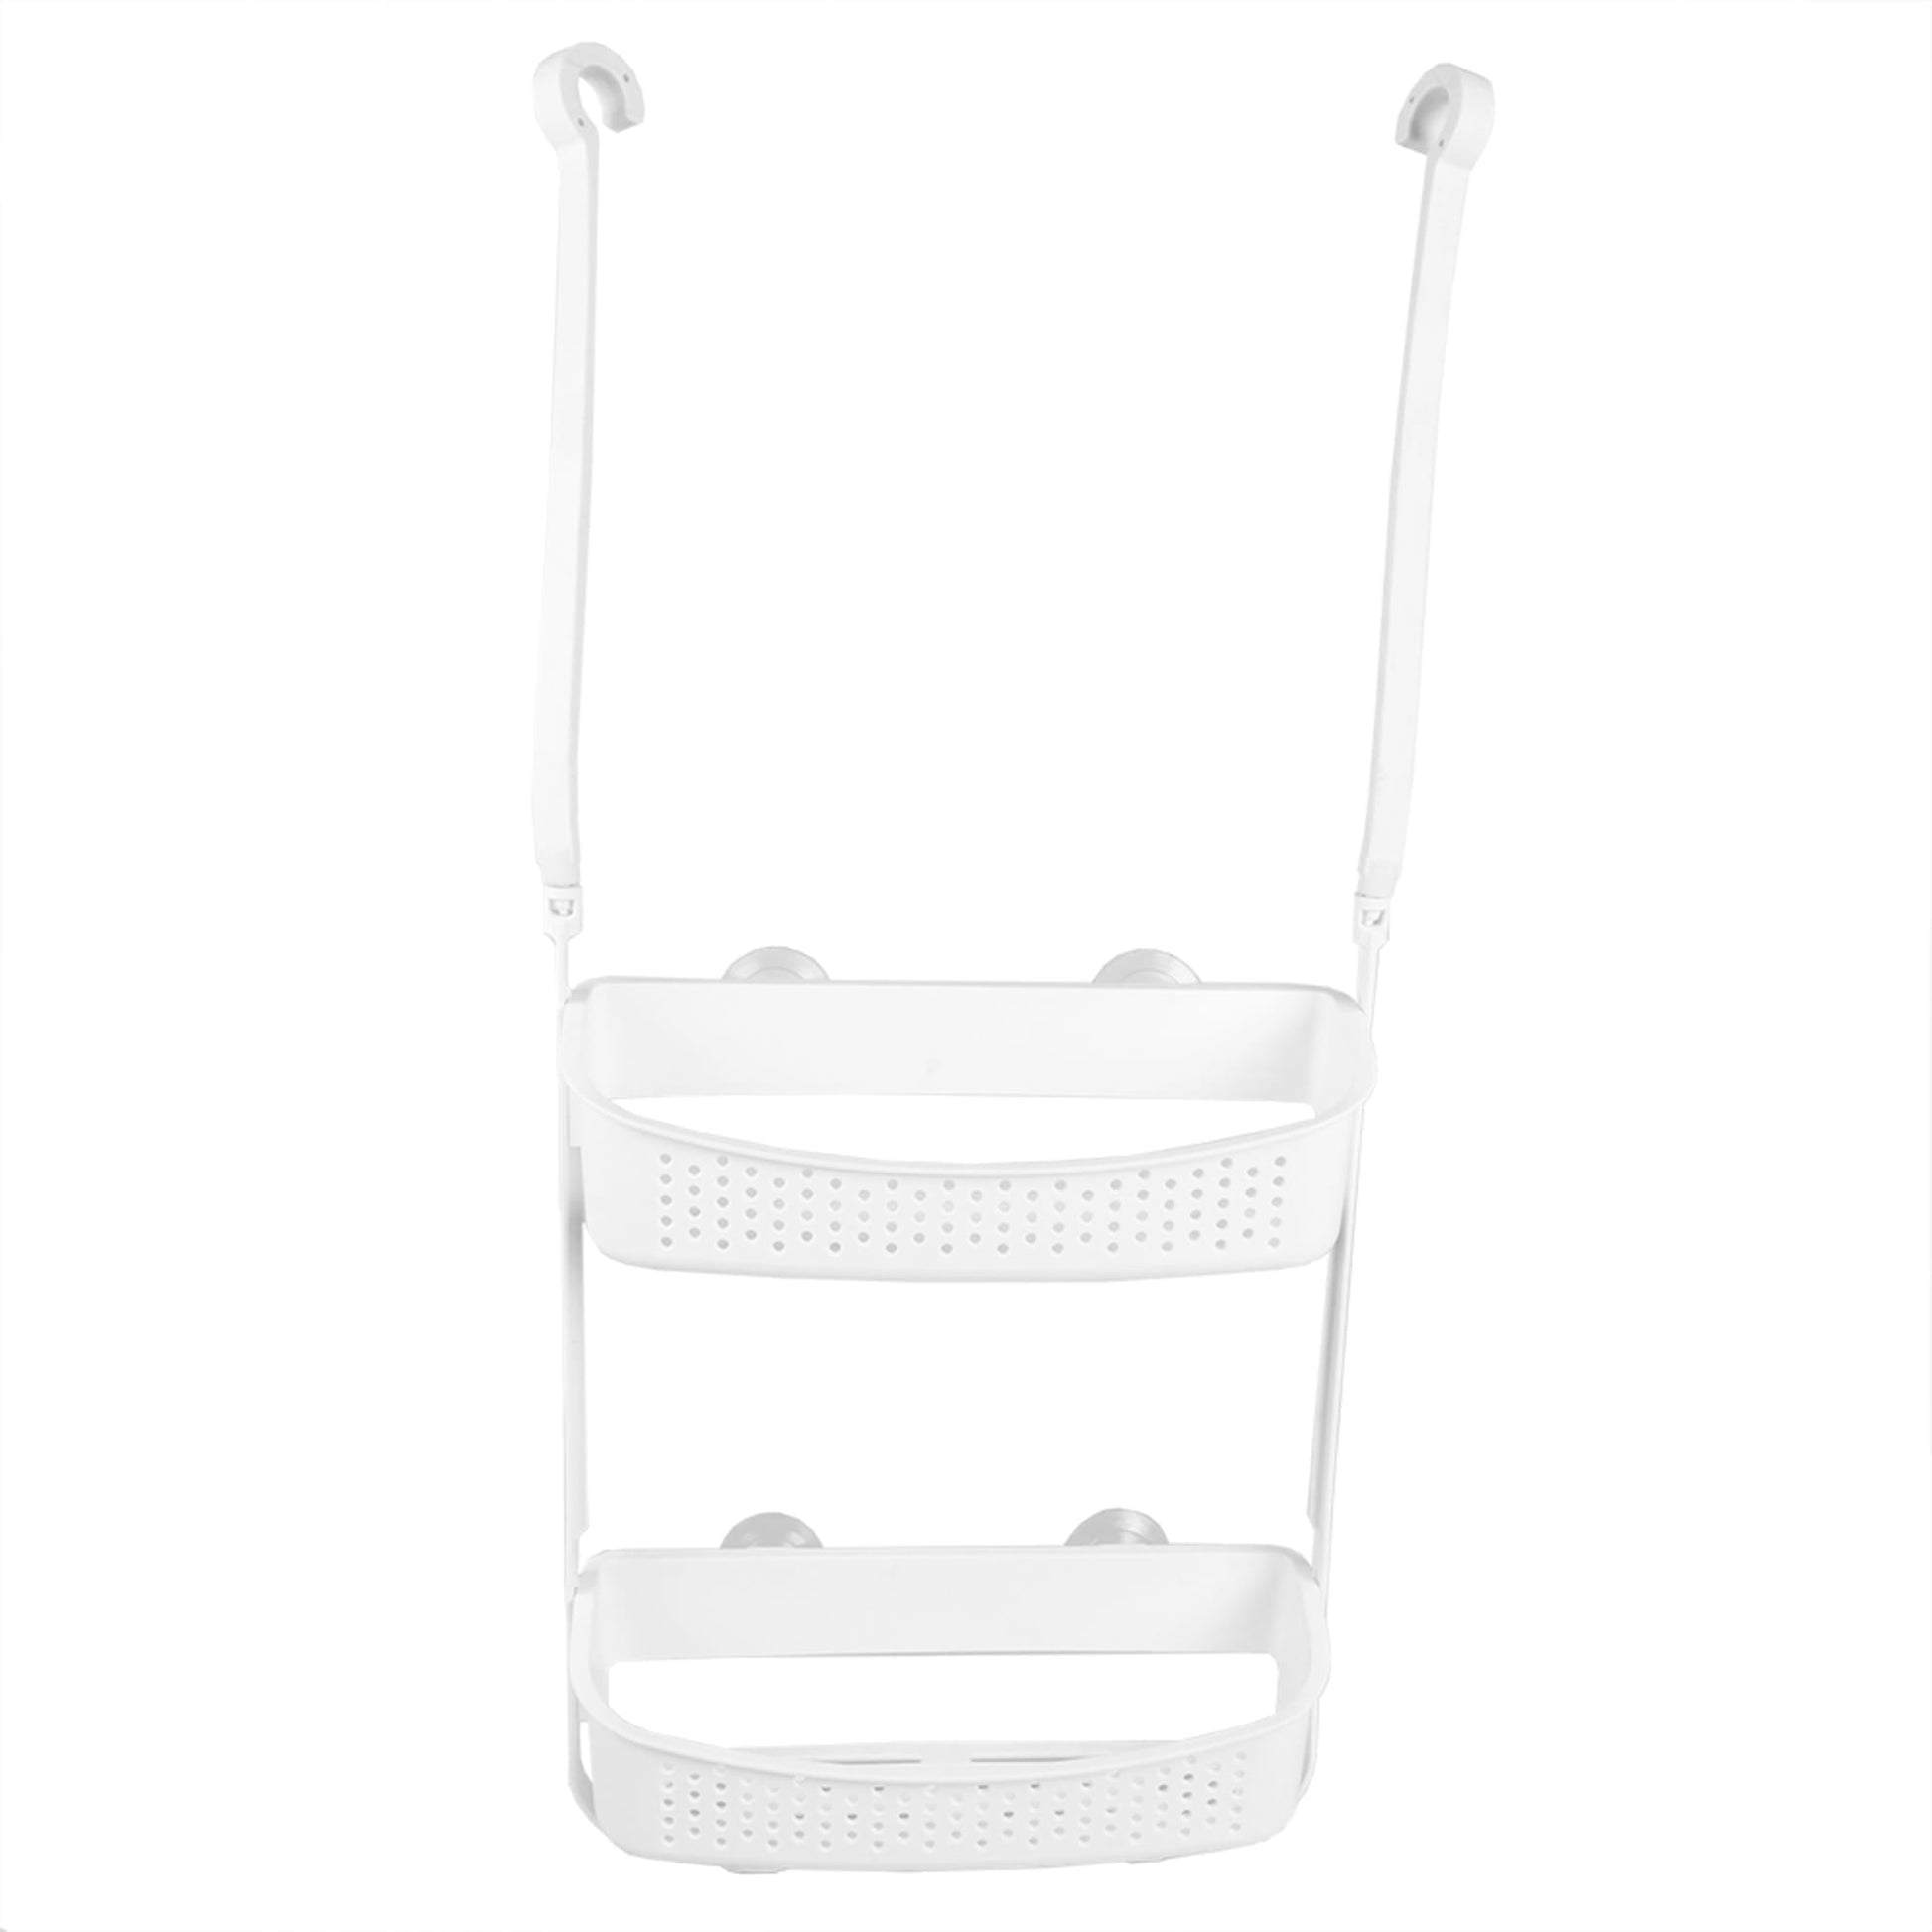 Home Basics Large Plastic Bath Caddy with Suction Cups, Clear, SHOWER